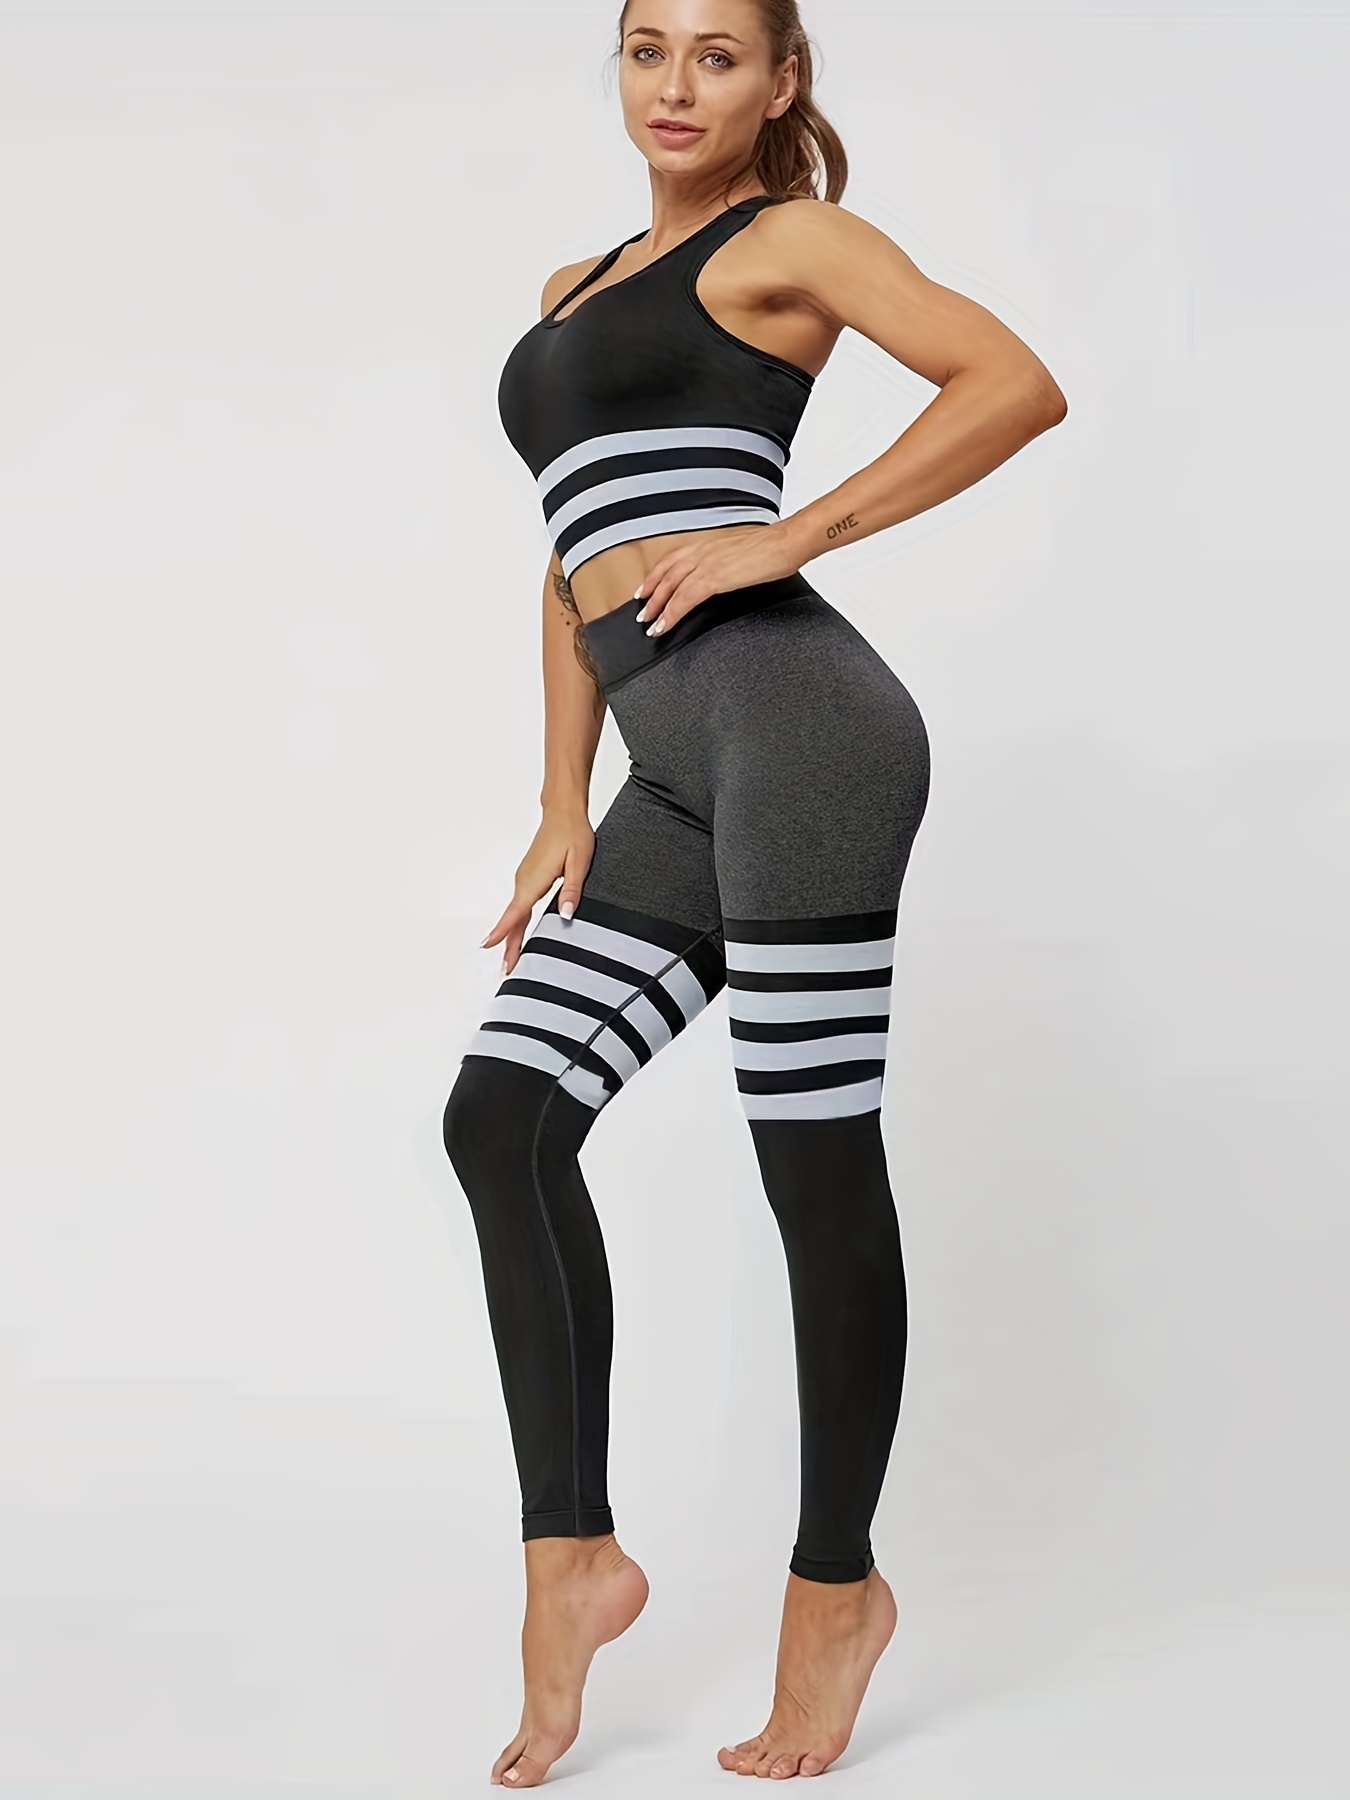 Striped Detail Sports Leggings For Women, Seamless High Waisted Slimming  Workout Gym Yoga Tight Pants, Women's Activewear